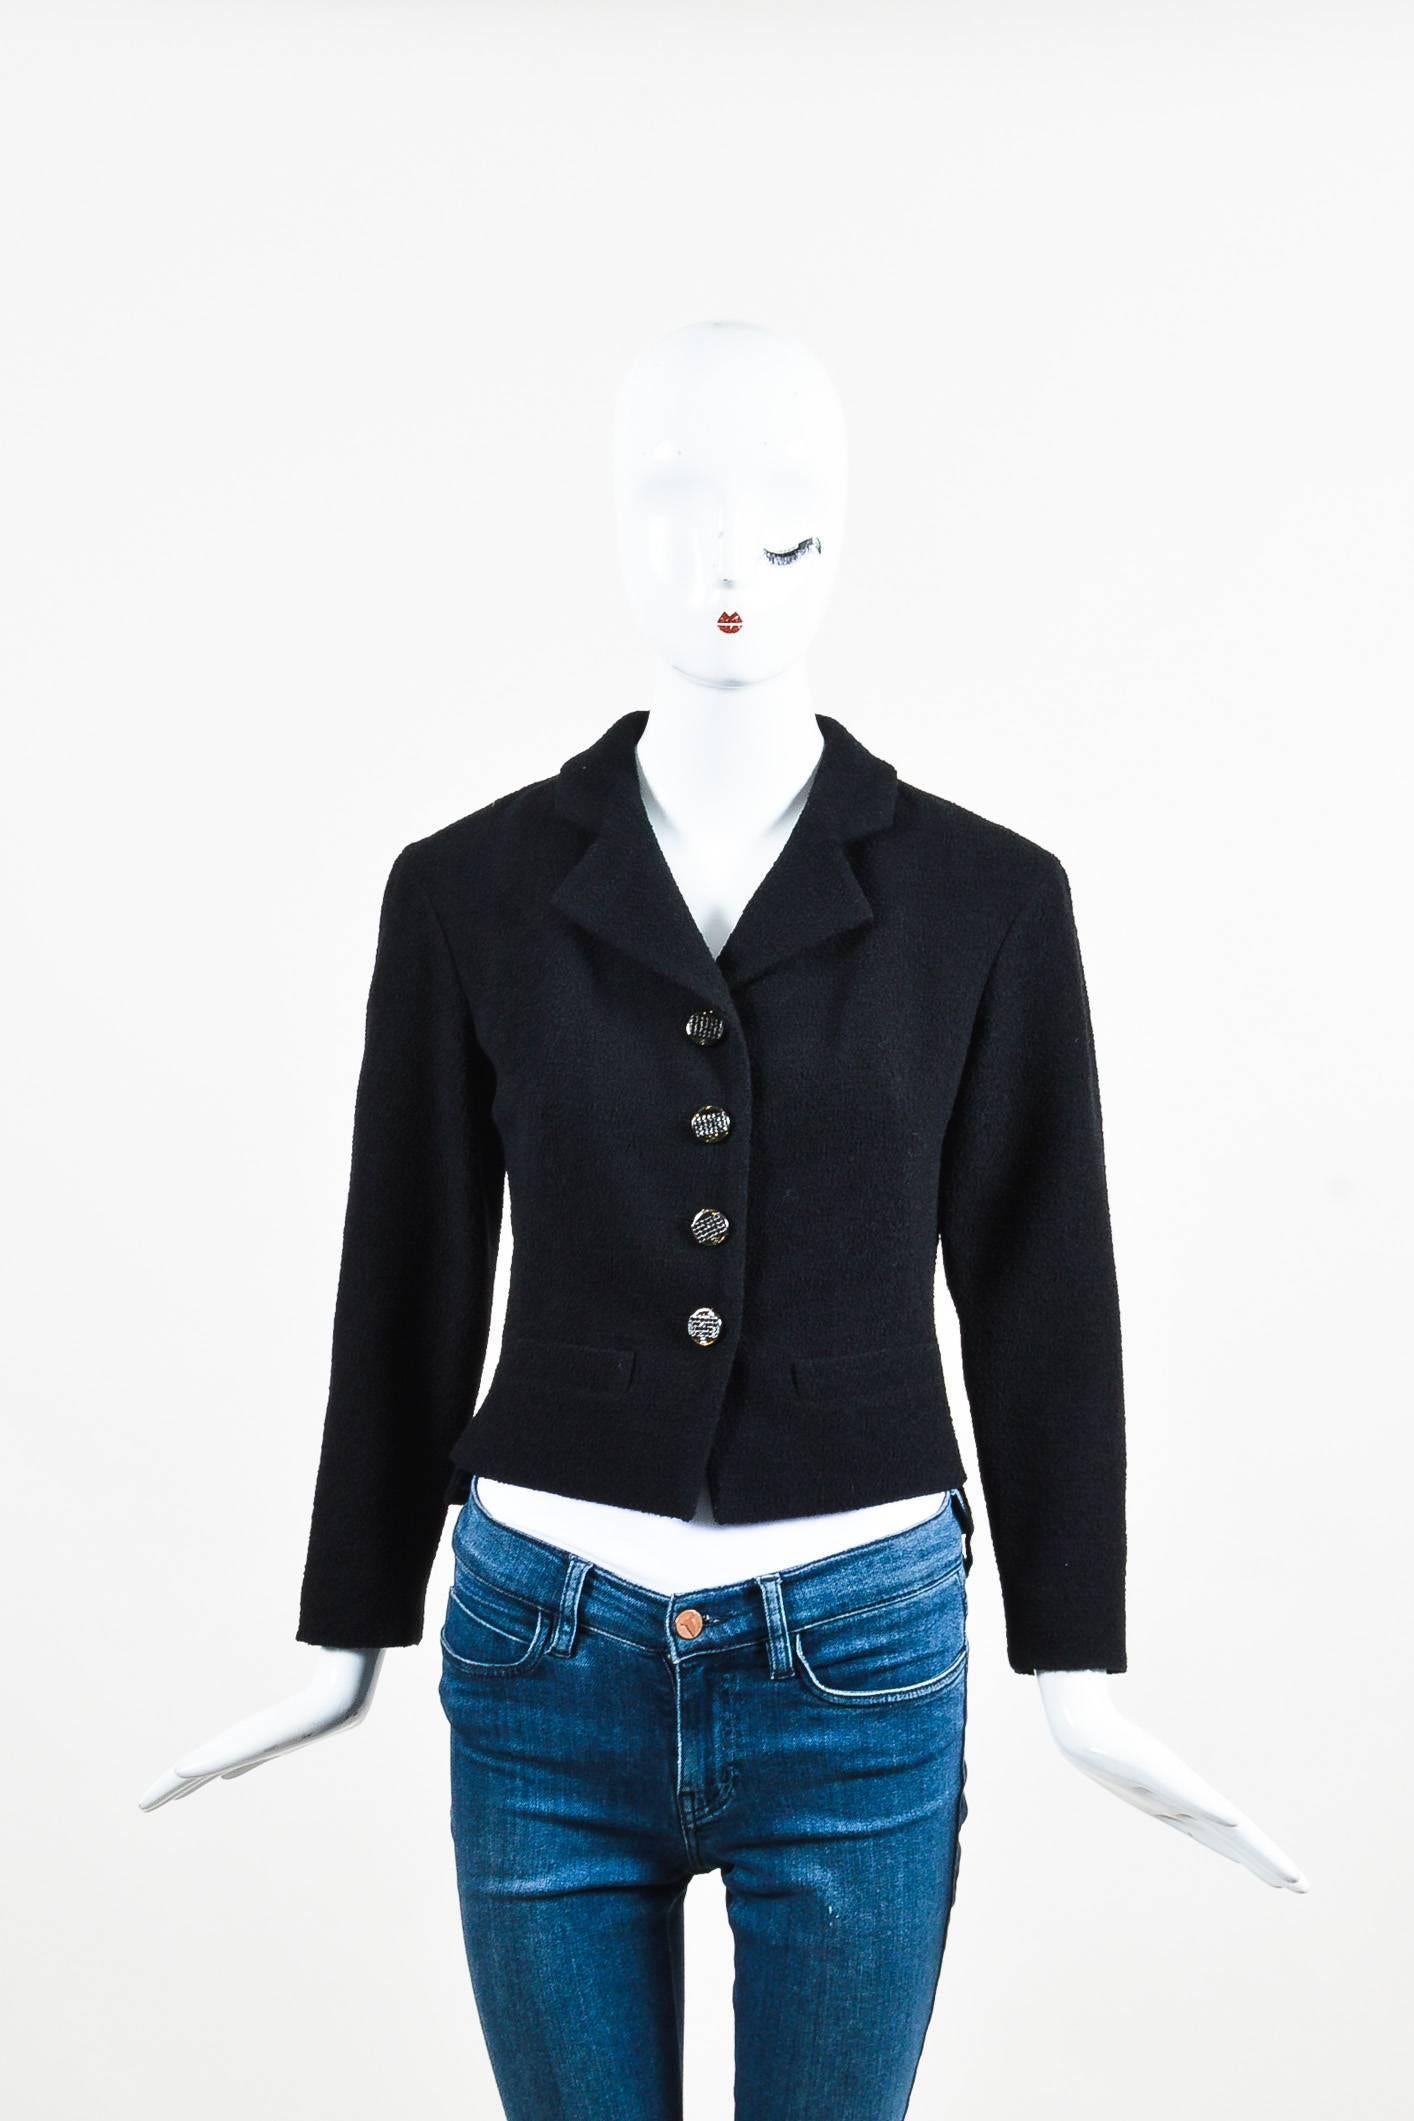 Fabric Content: Wool, Nylon, Silk; Lining: Silk

Item Specifics & Details: Chic and classic Chanel jacket in a black wool blend. Textural, boucle material with a weighted chain hem. Gunmetal, rhinestone buttons at the front with glitter accents